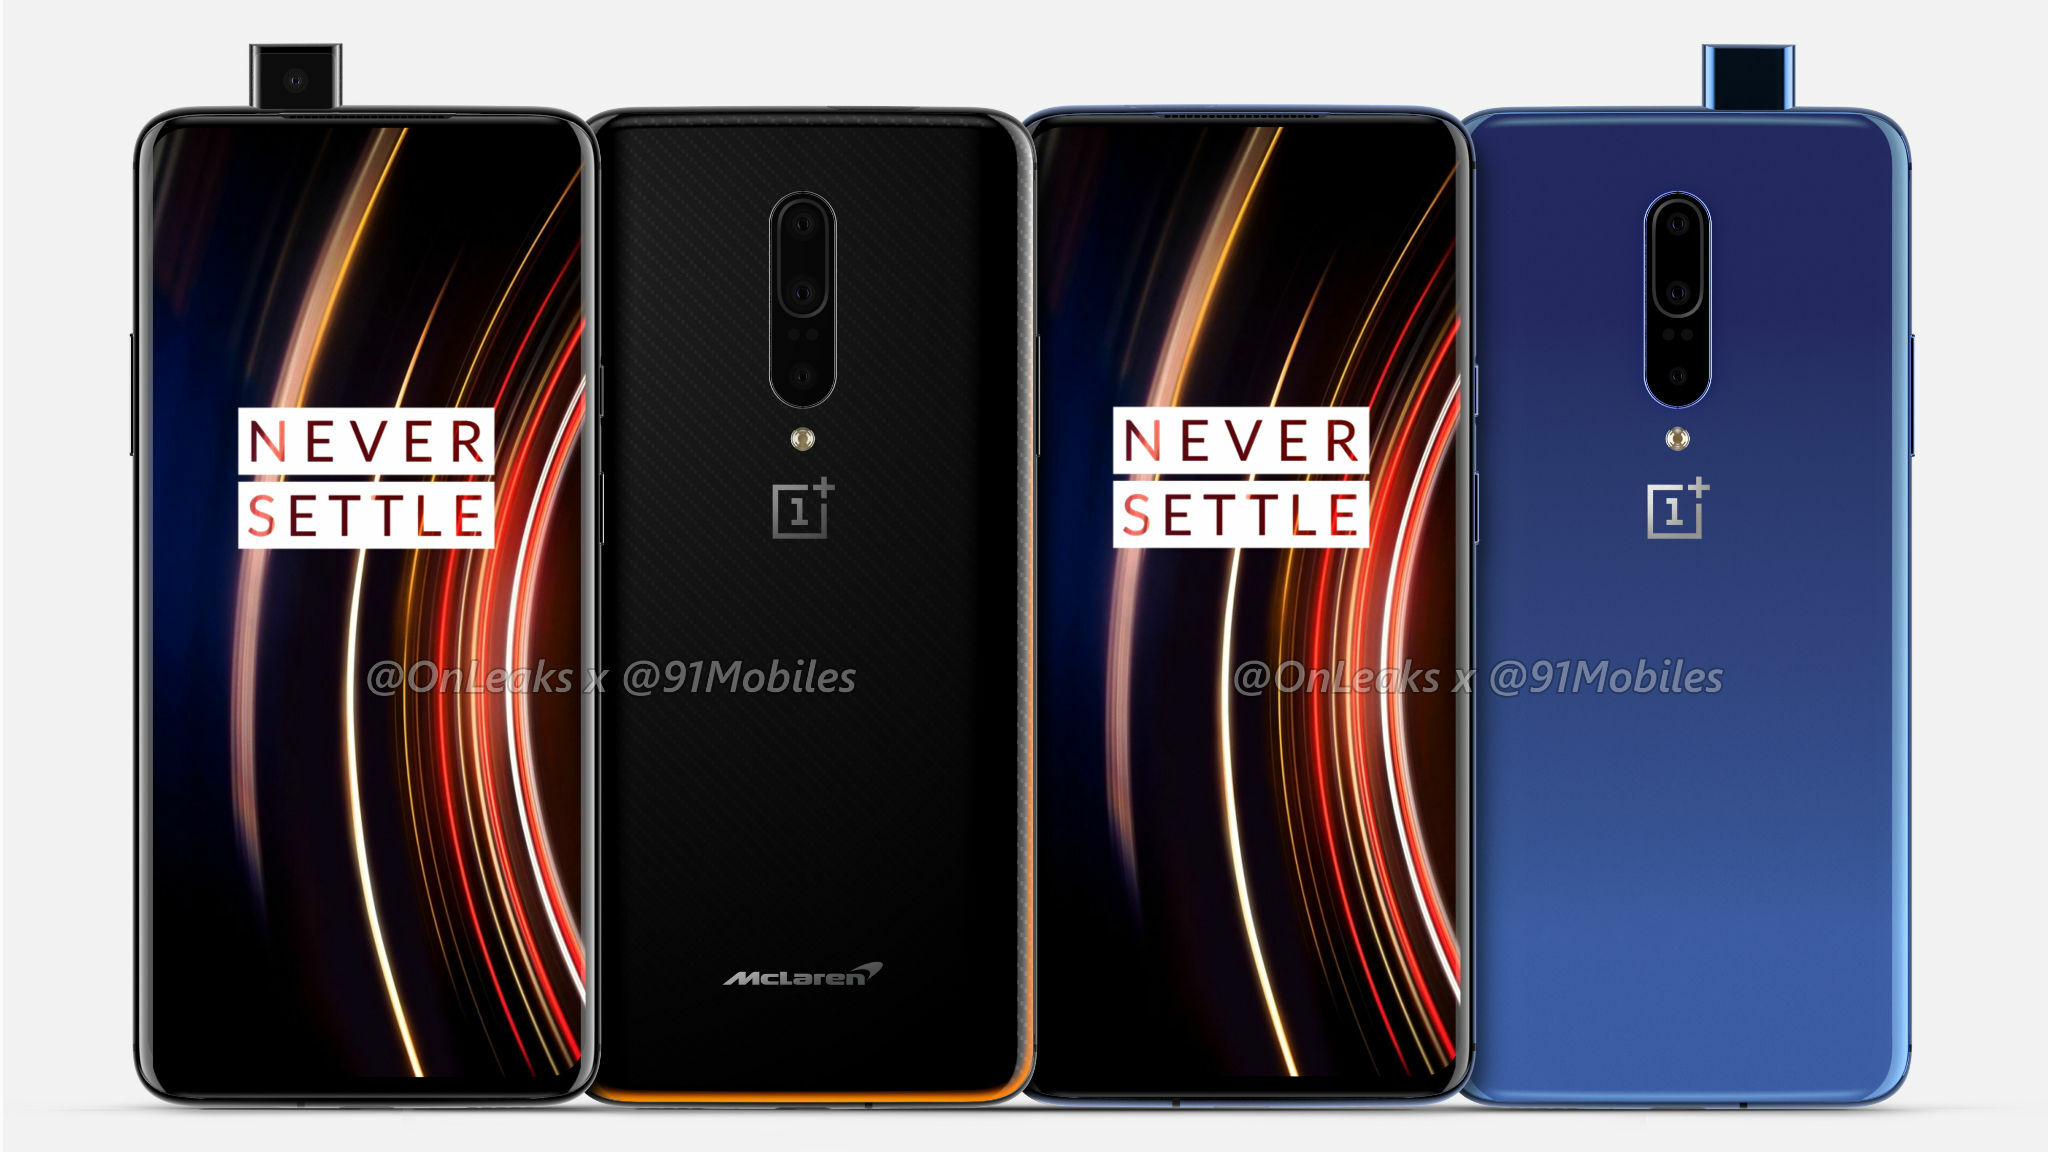 What about the OnePlus 7T